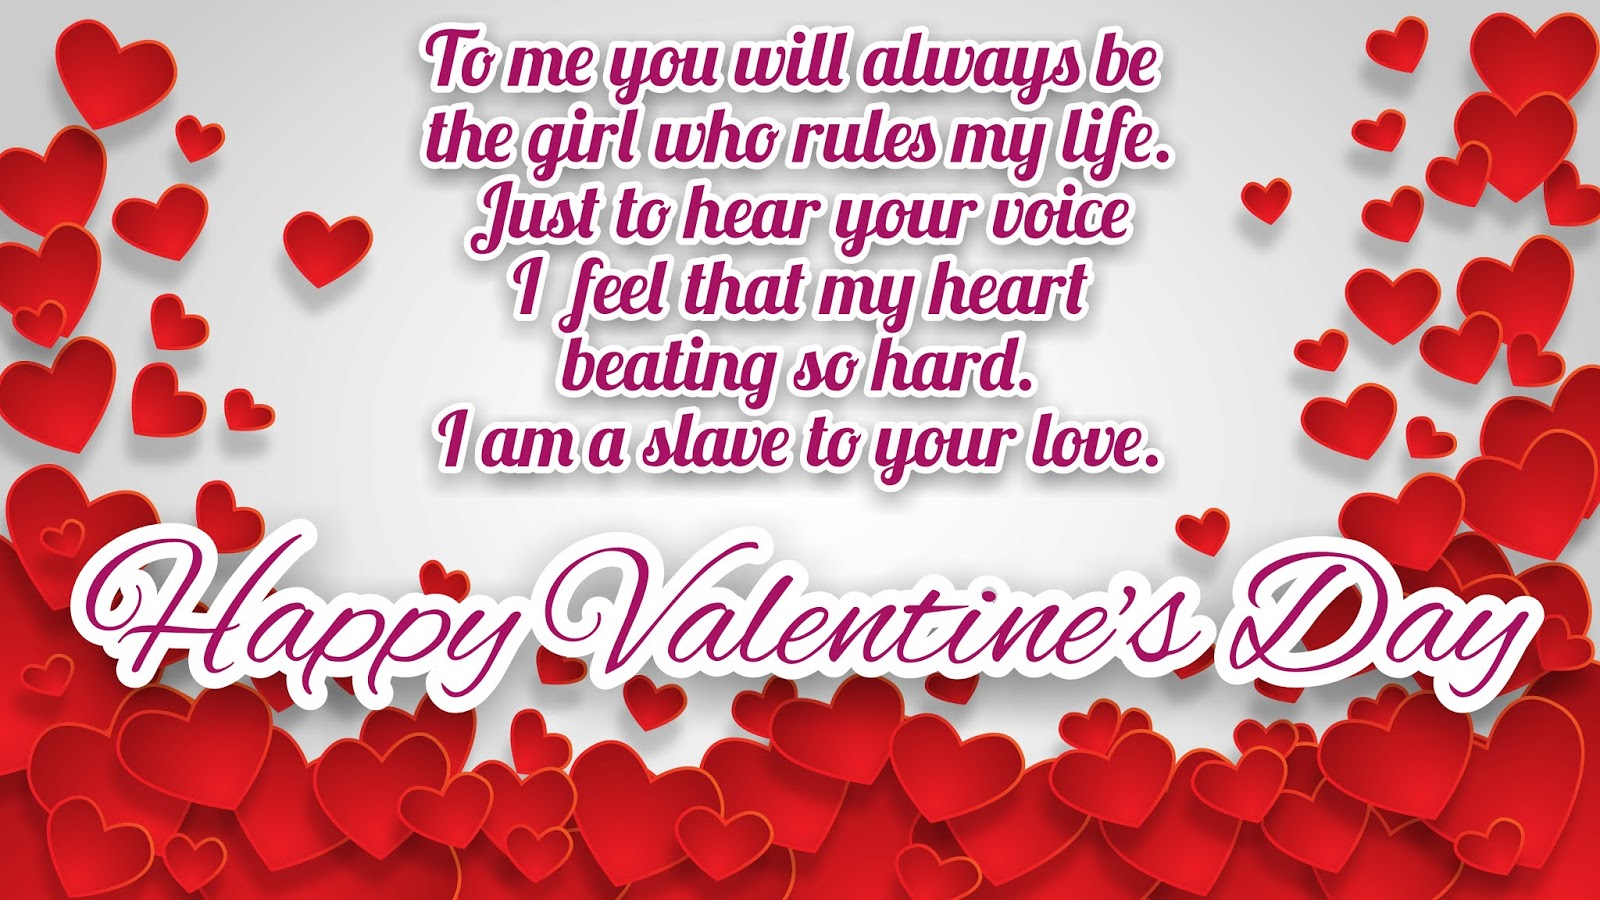 Images Of Happy Valentines Day Wishes Messages Pics Of Valentines